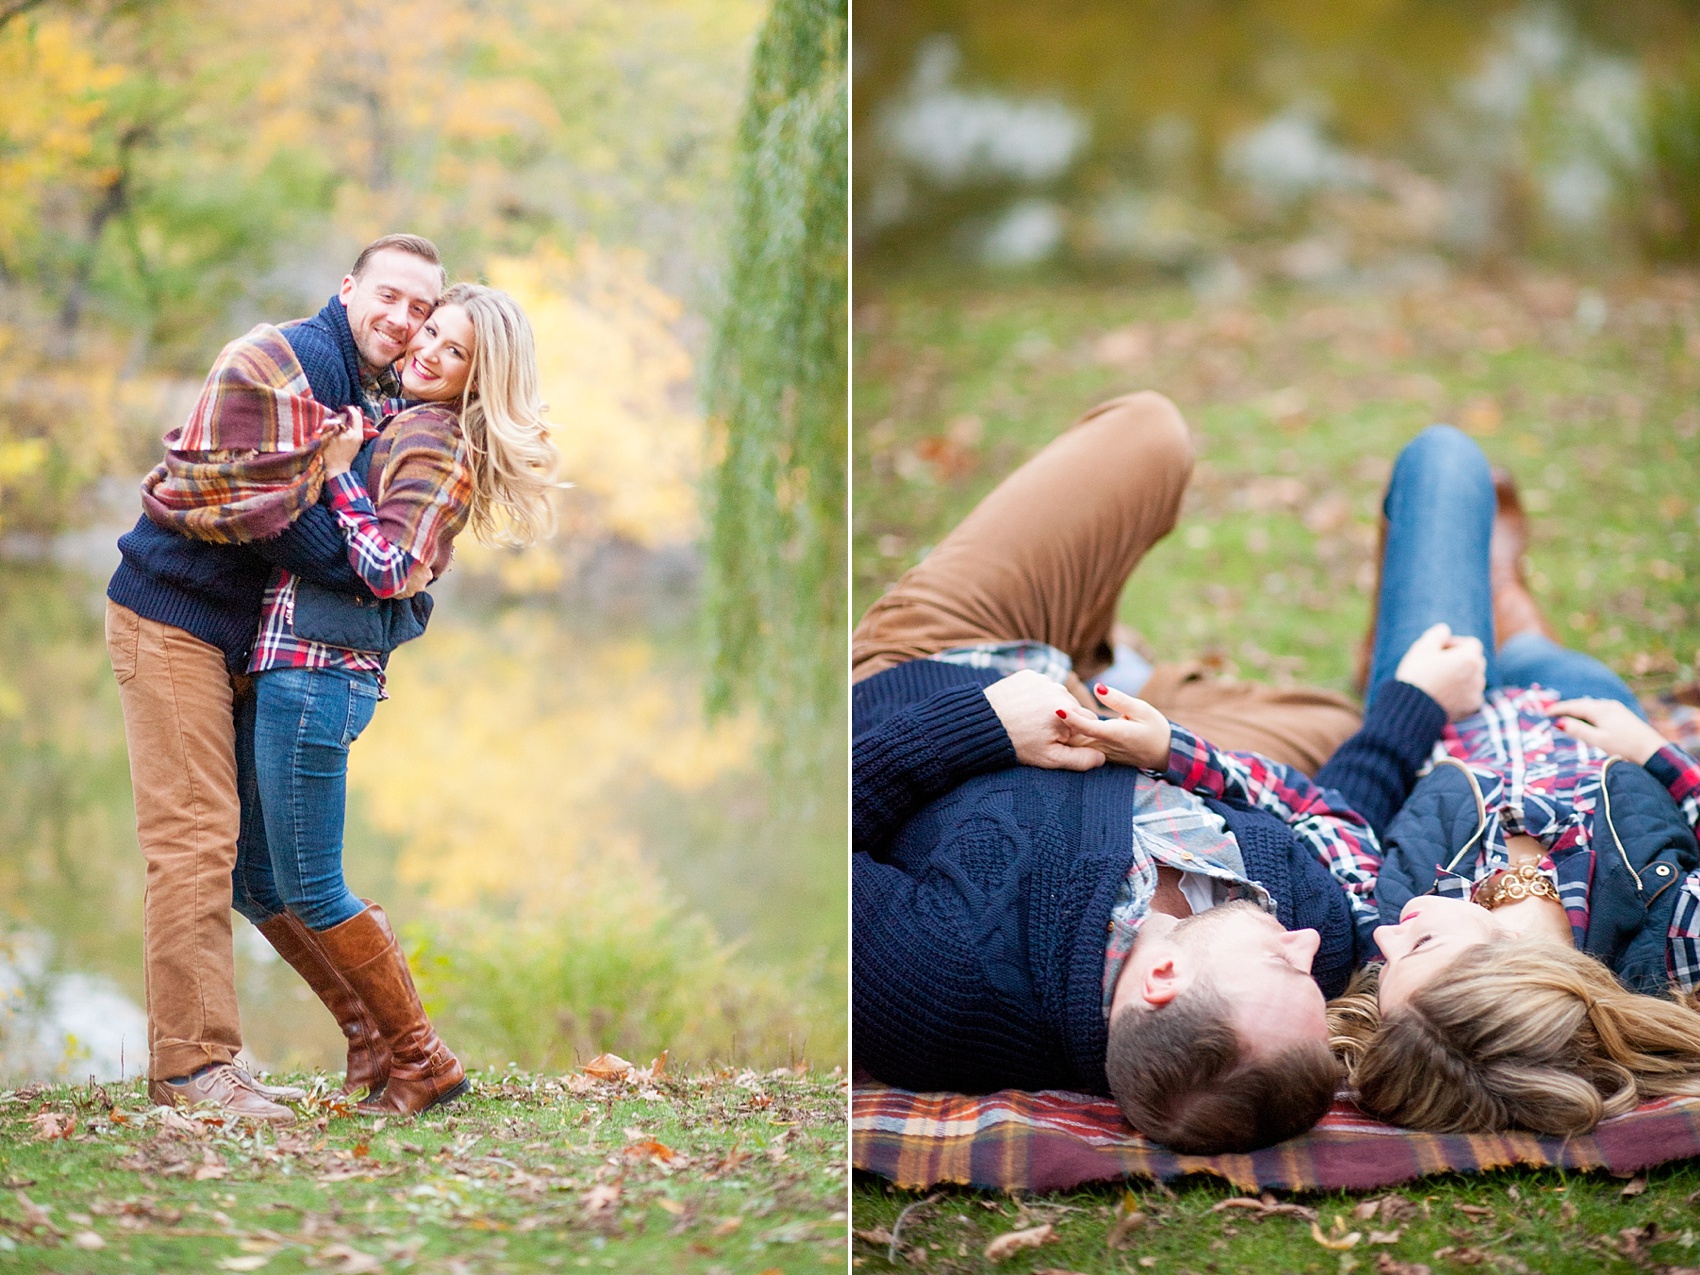 Central Park fall engagement photos in NYC by New York City wedding photographer, Mikkel Paige Photography. Photos by the Boathouse.